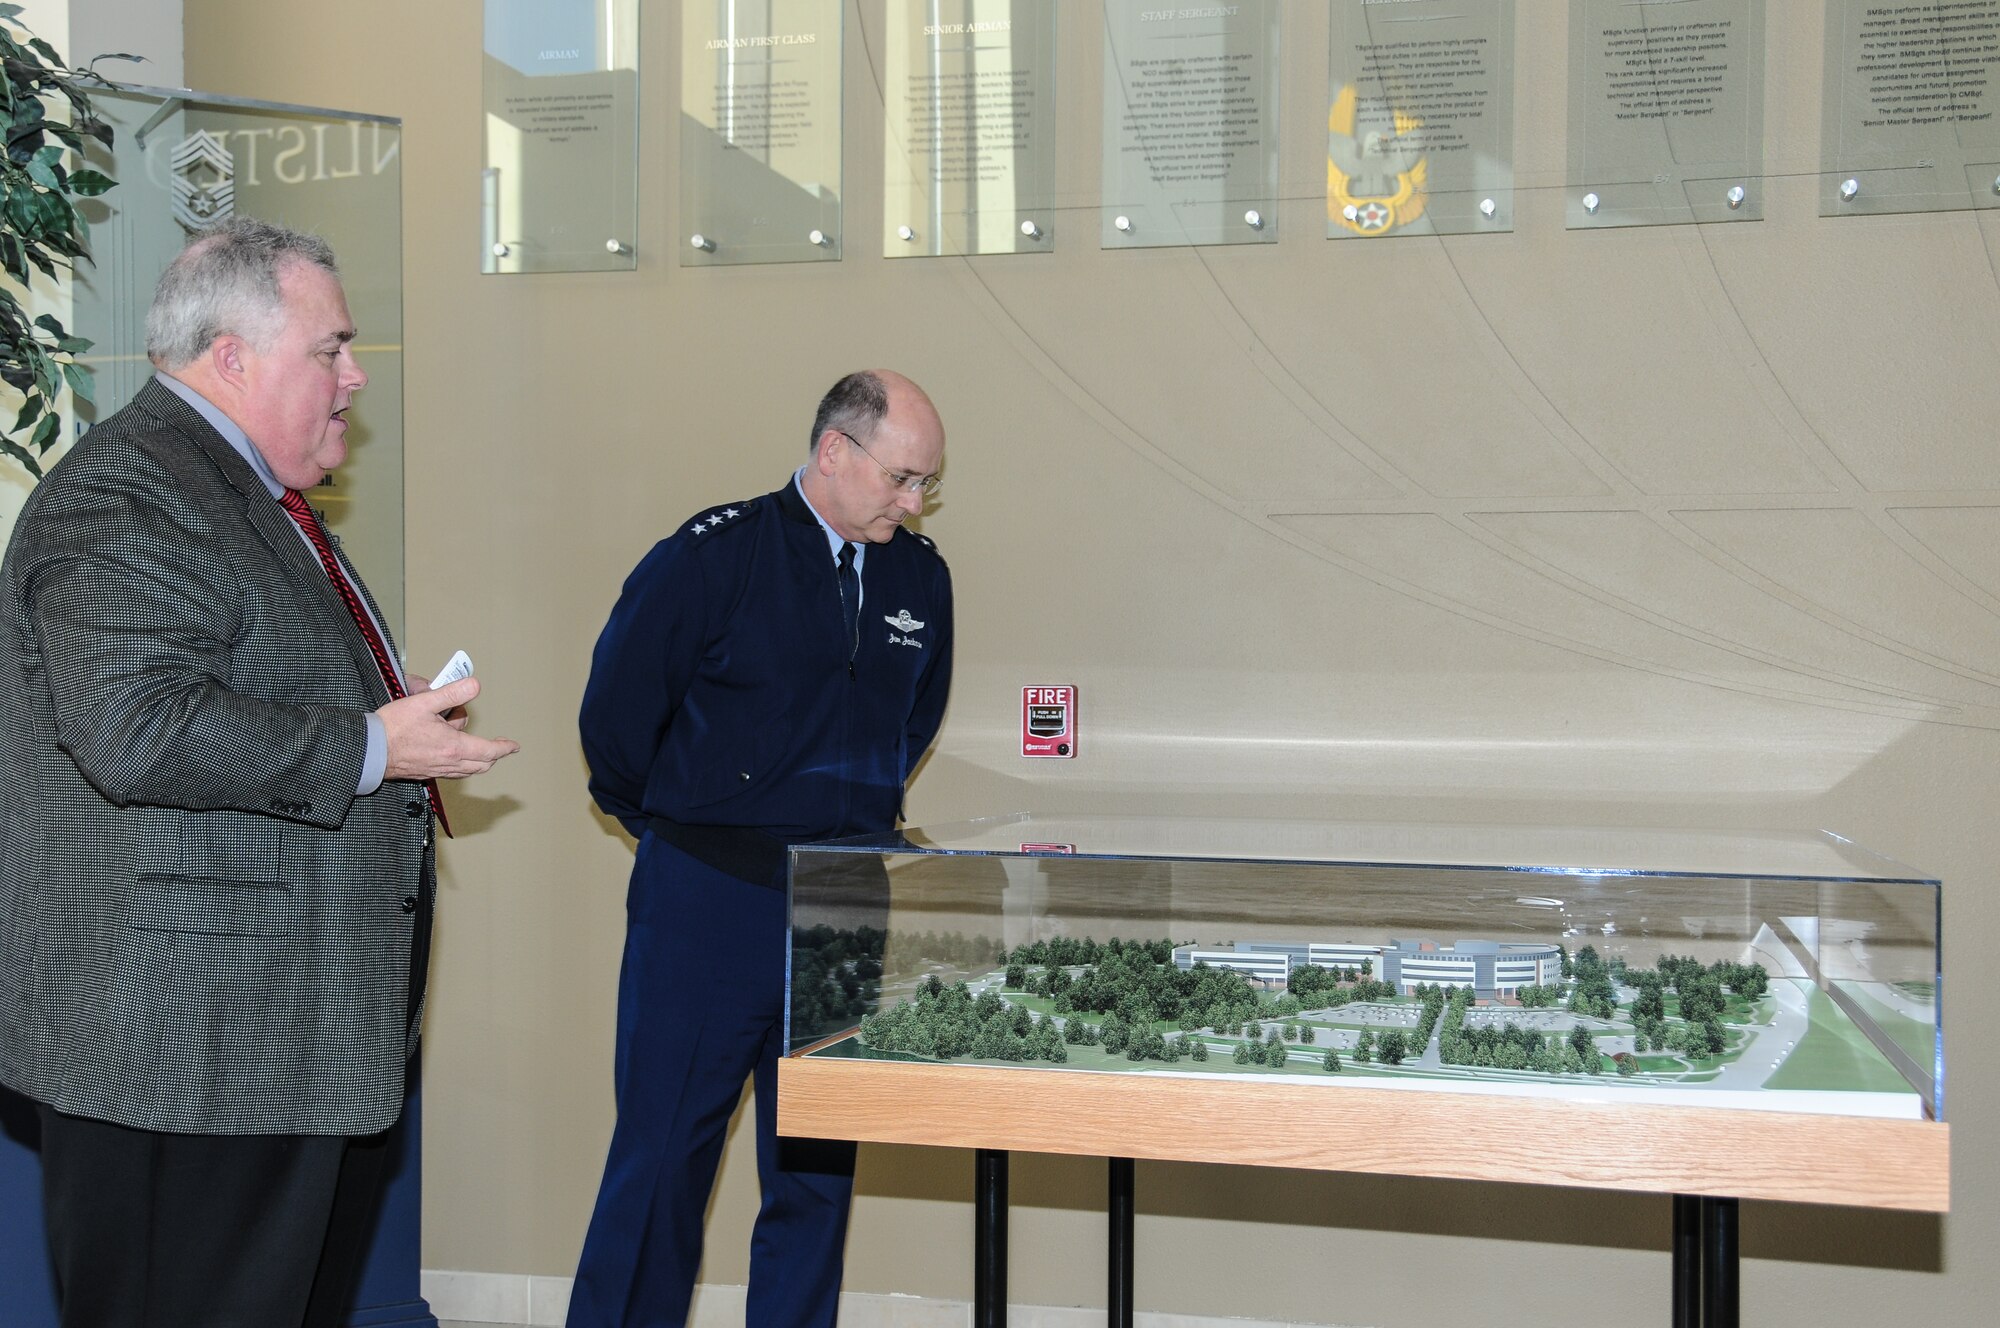 Kenneth Crosby, project manager for architectural firm "Jacobs Engineering Inc.," explains the highlights of the new Headquarters Air Force Reserve Complex to Lt. Gen. James F. Jackson Nov. 13, 2012, on Robins Air Force Base Ga. Jackson is the chief of Air Force Reserve, Headquarters U.S. Air Force, Washington, D.C., and commander, Air Force Reserve Command, Robins AFB (U.S. Air Force photo/Staff Sgt. Alexy Saltekoff).